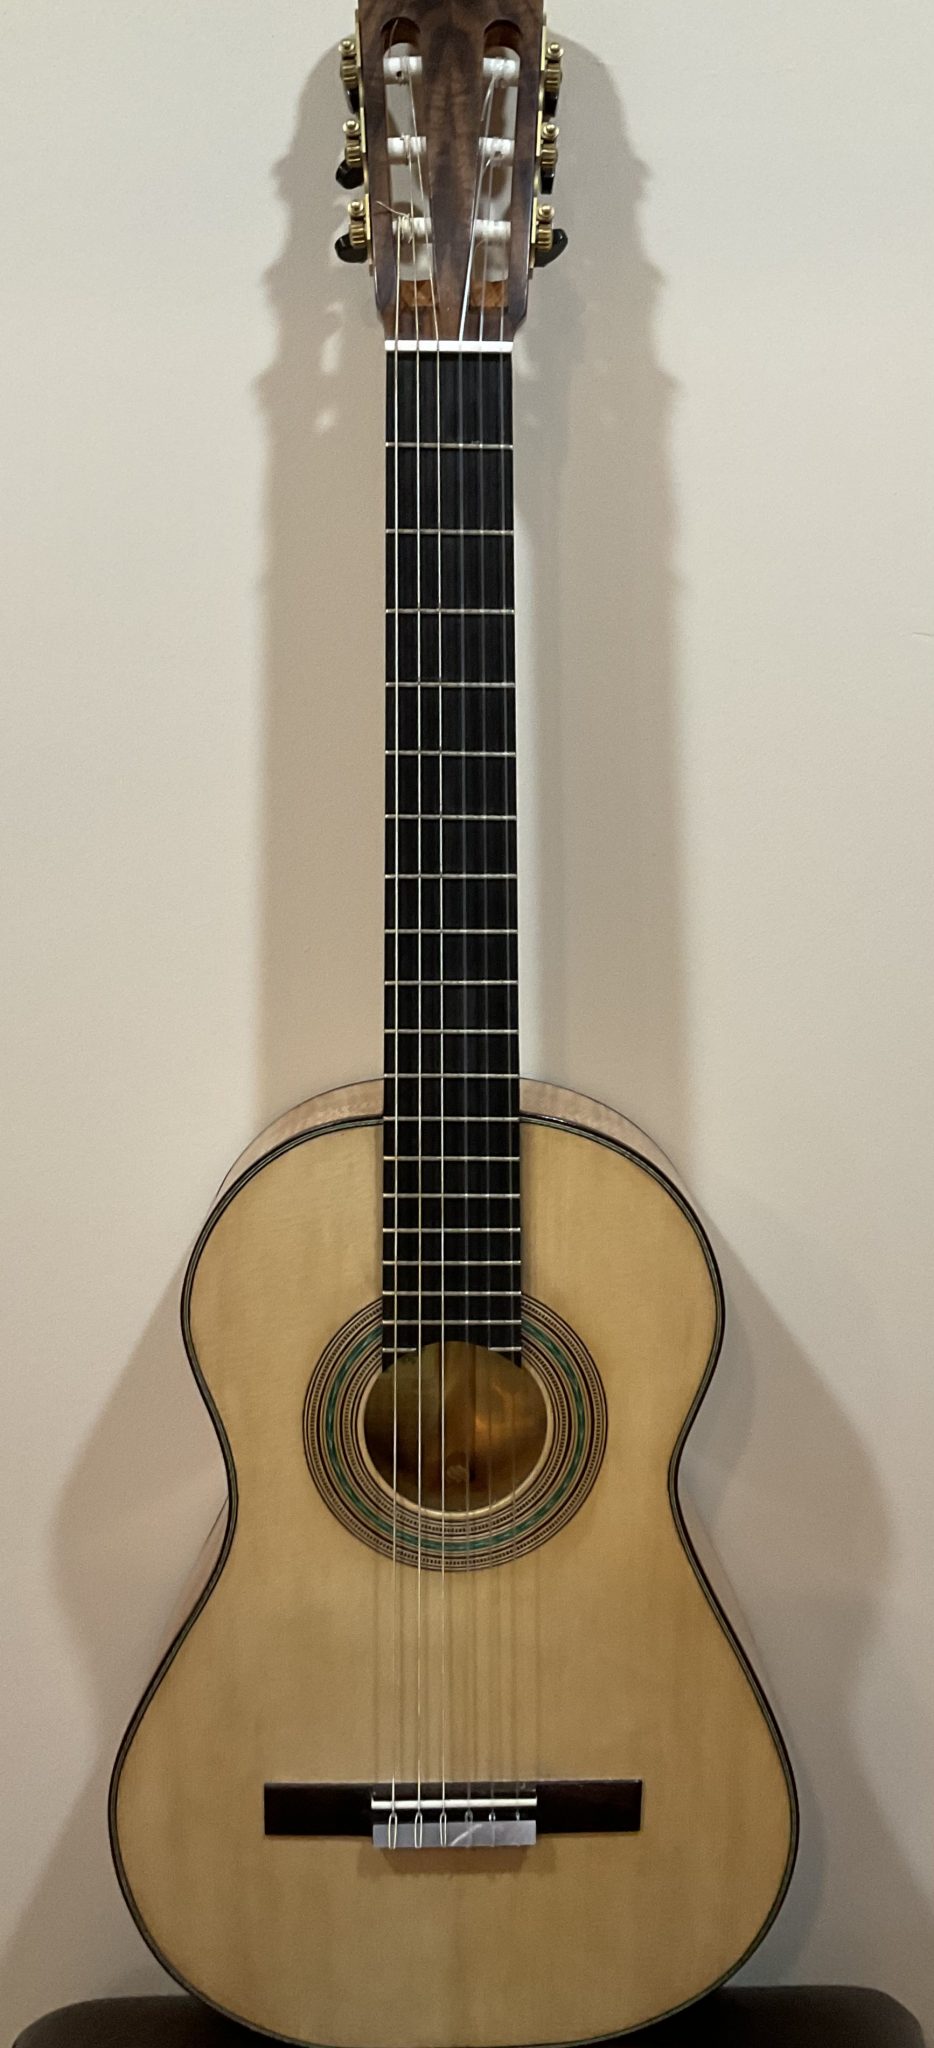 A classical guitar modeled on those of Antonio Torres and built using traditional hand tools and materials.